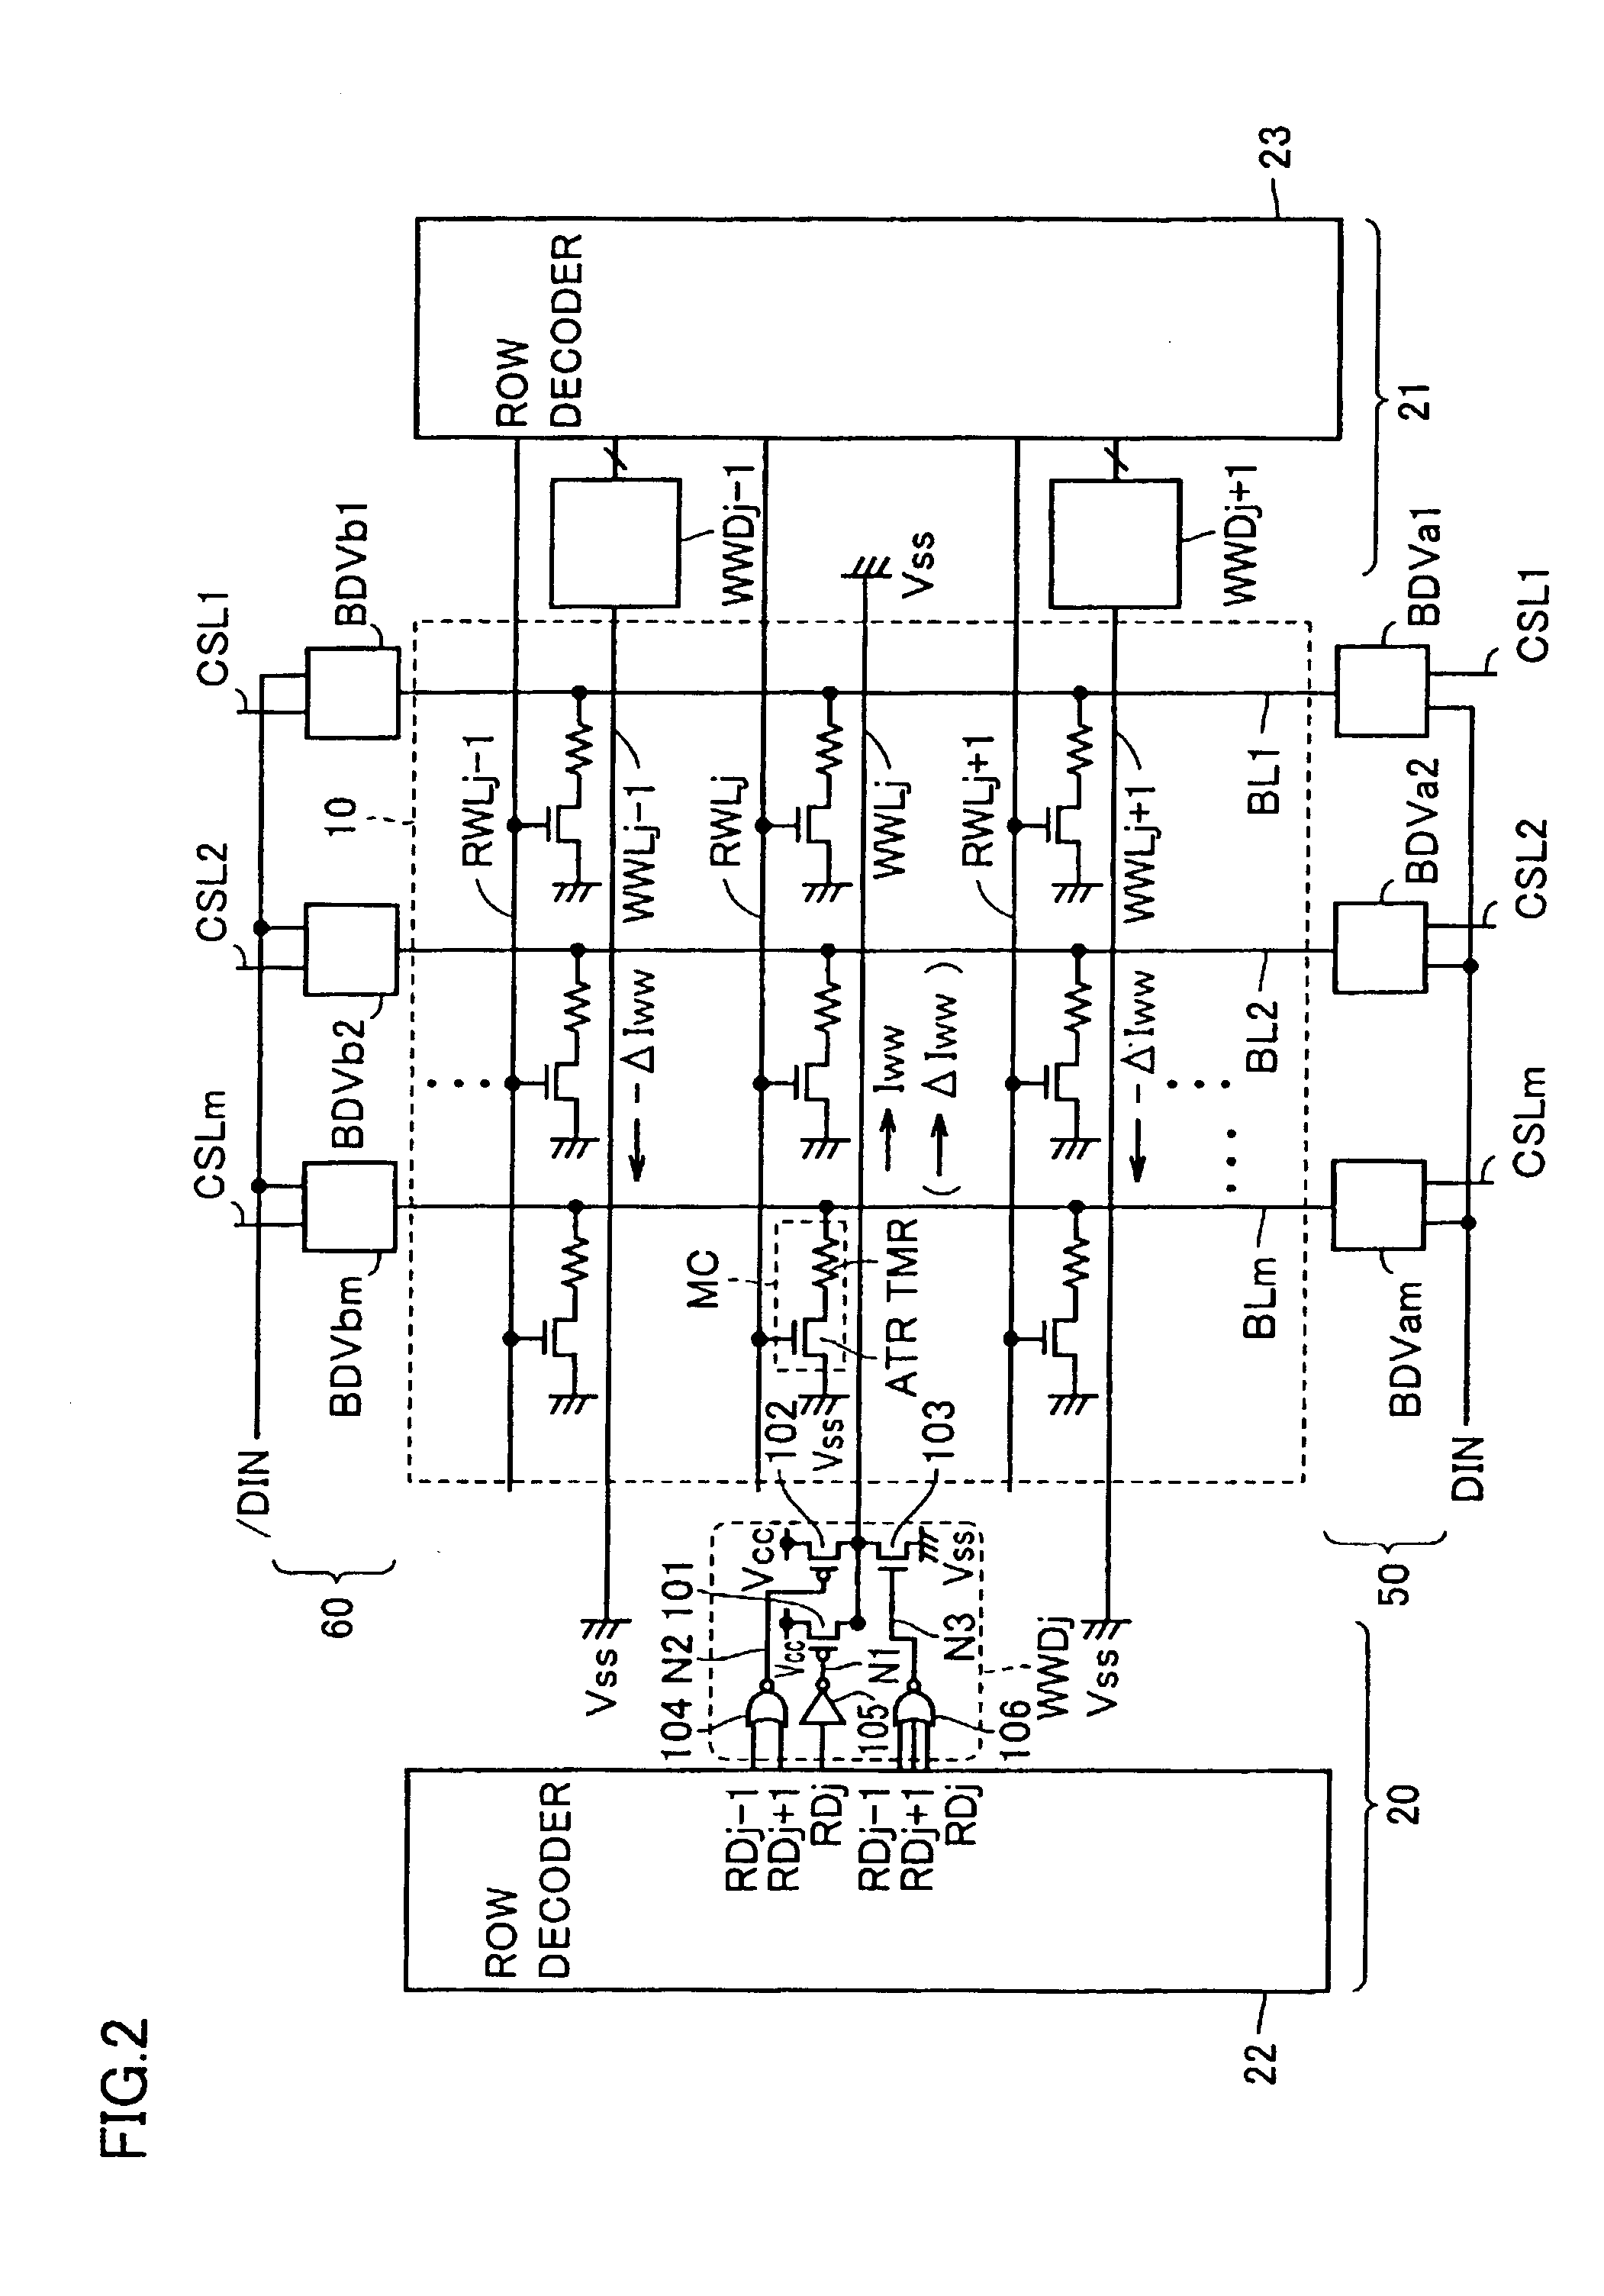 Thin film magnetic memory device applying a magnetic field to write data